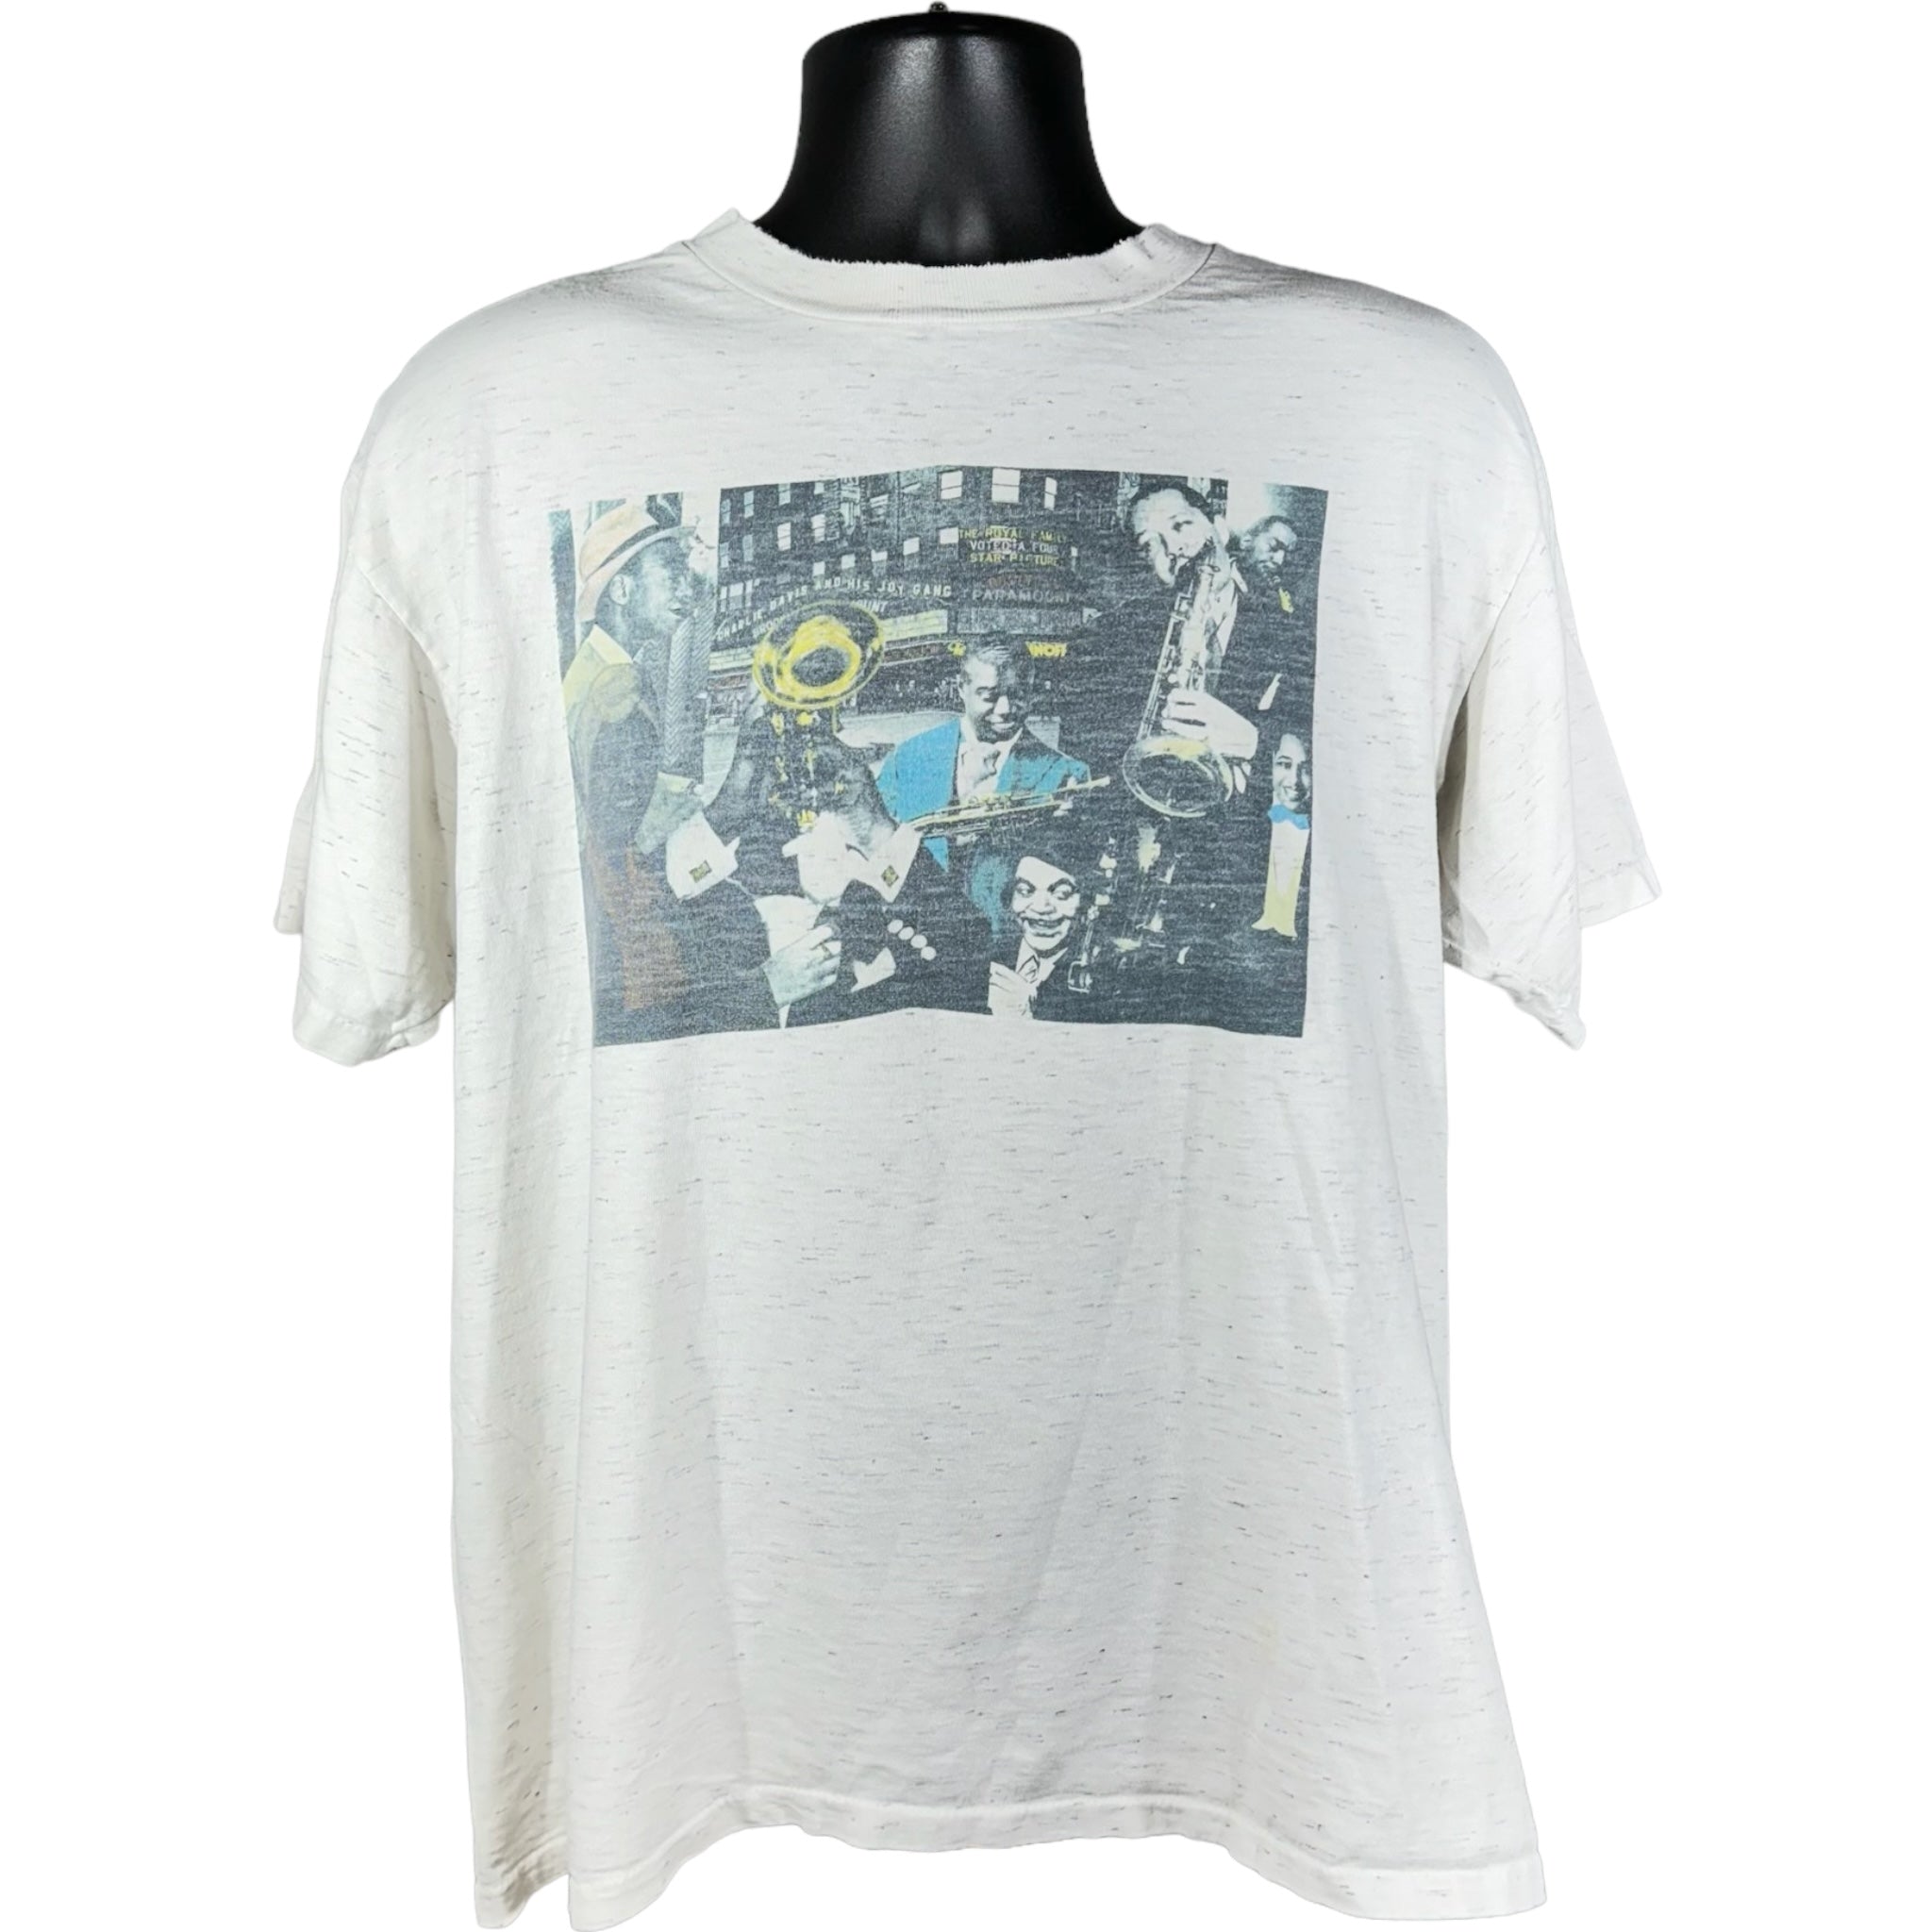 Vintage Louis Armstrong With The Band Graphic Tee